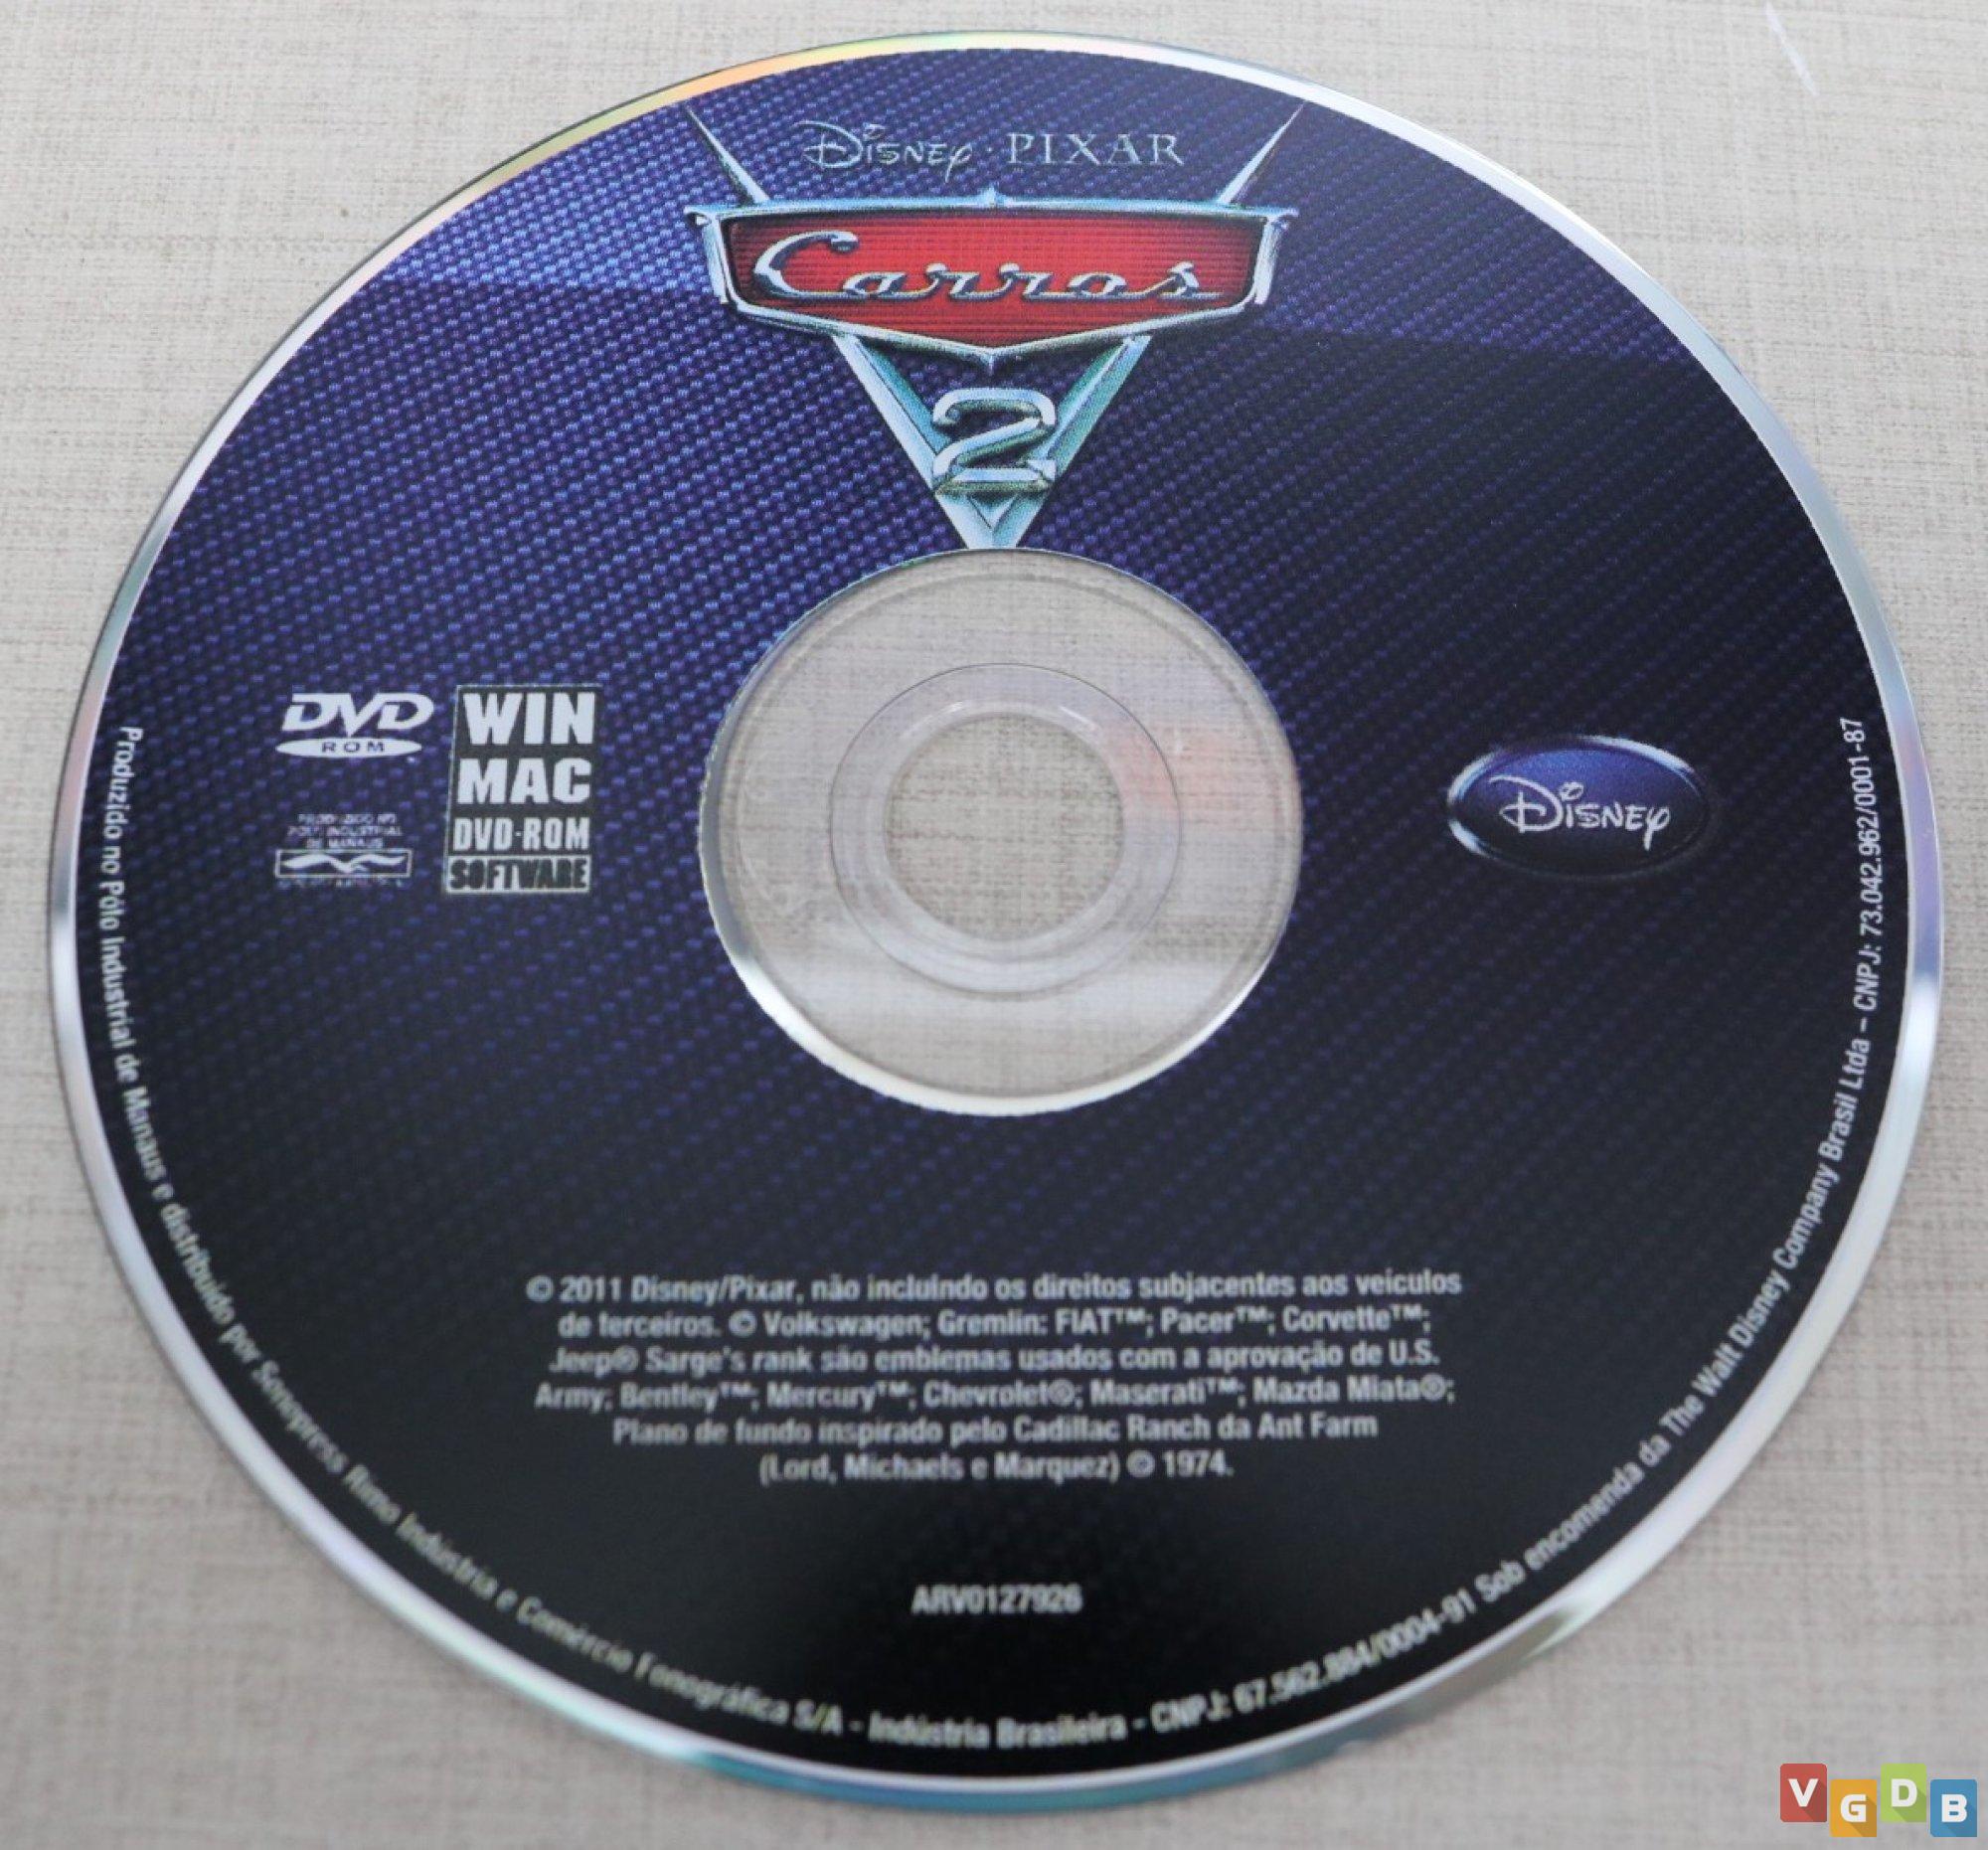 Cars 2 PC DVD-ROM Software Game by Disney Pixar Computer Video Game